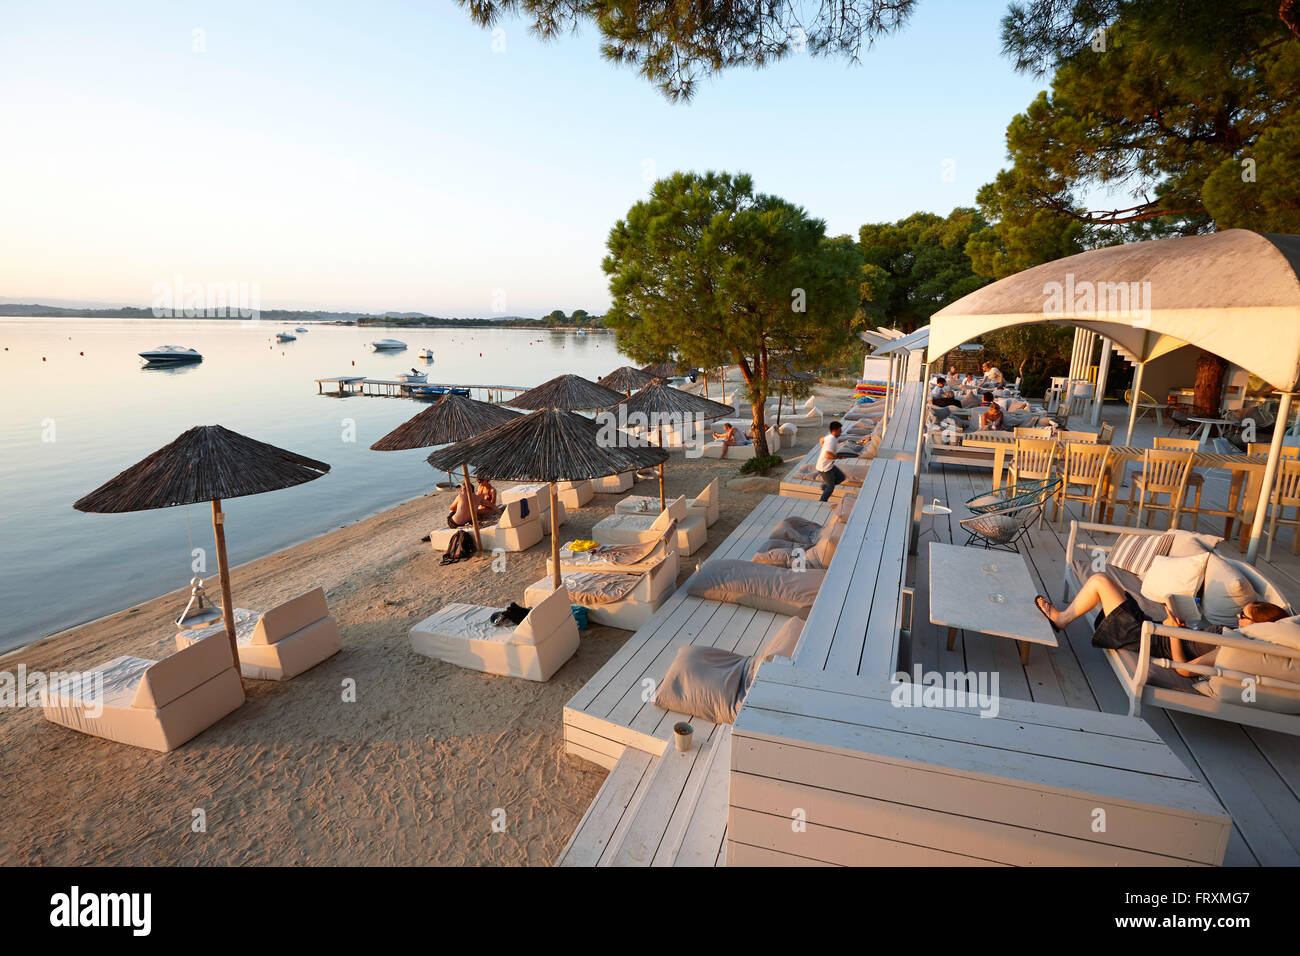 Beach bar of a hotel in the evening, Vourvourou, Sithonia, Chalkidiki, Greece Stock Photo